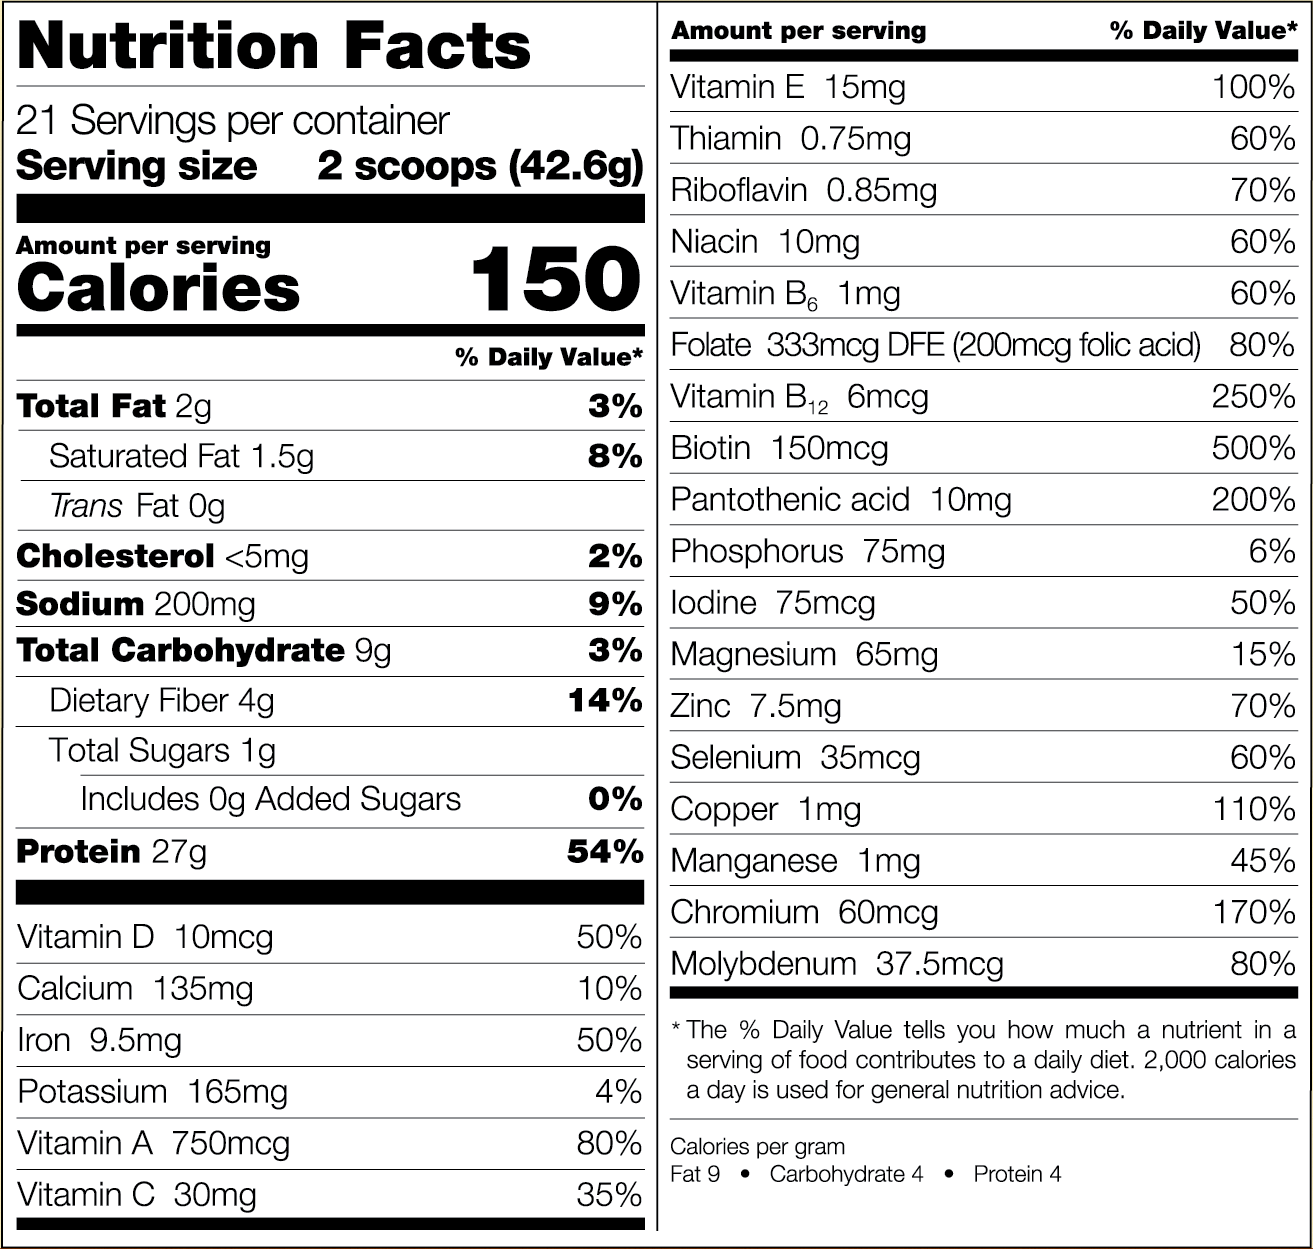 Chocolate Peanut Butter High Protein Meal Replacement - Bariatric Fusion